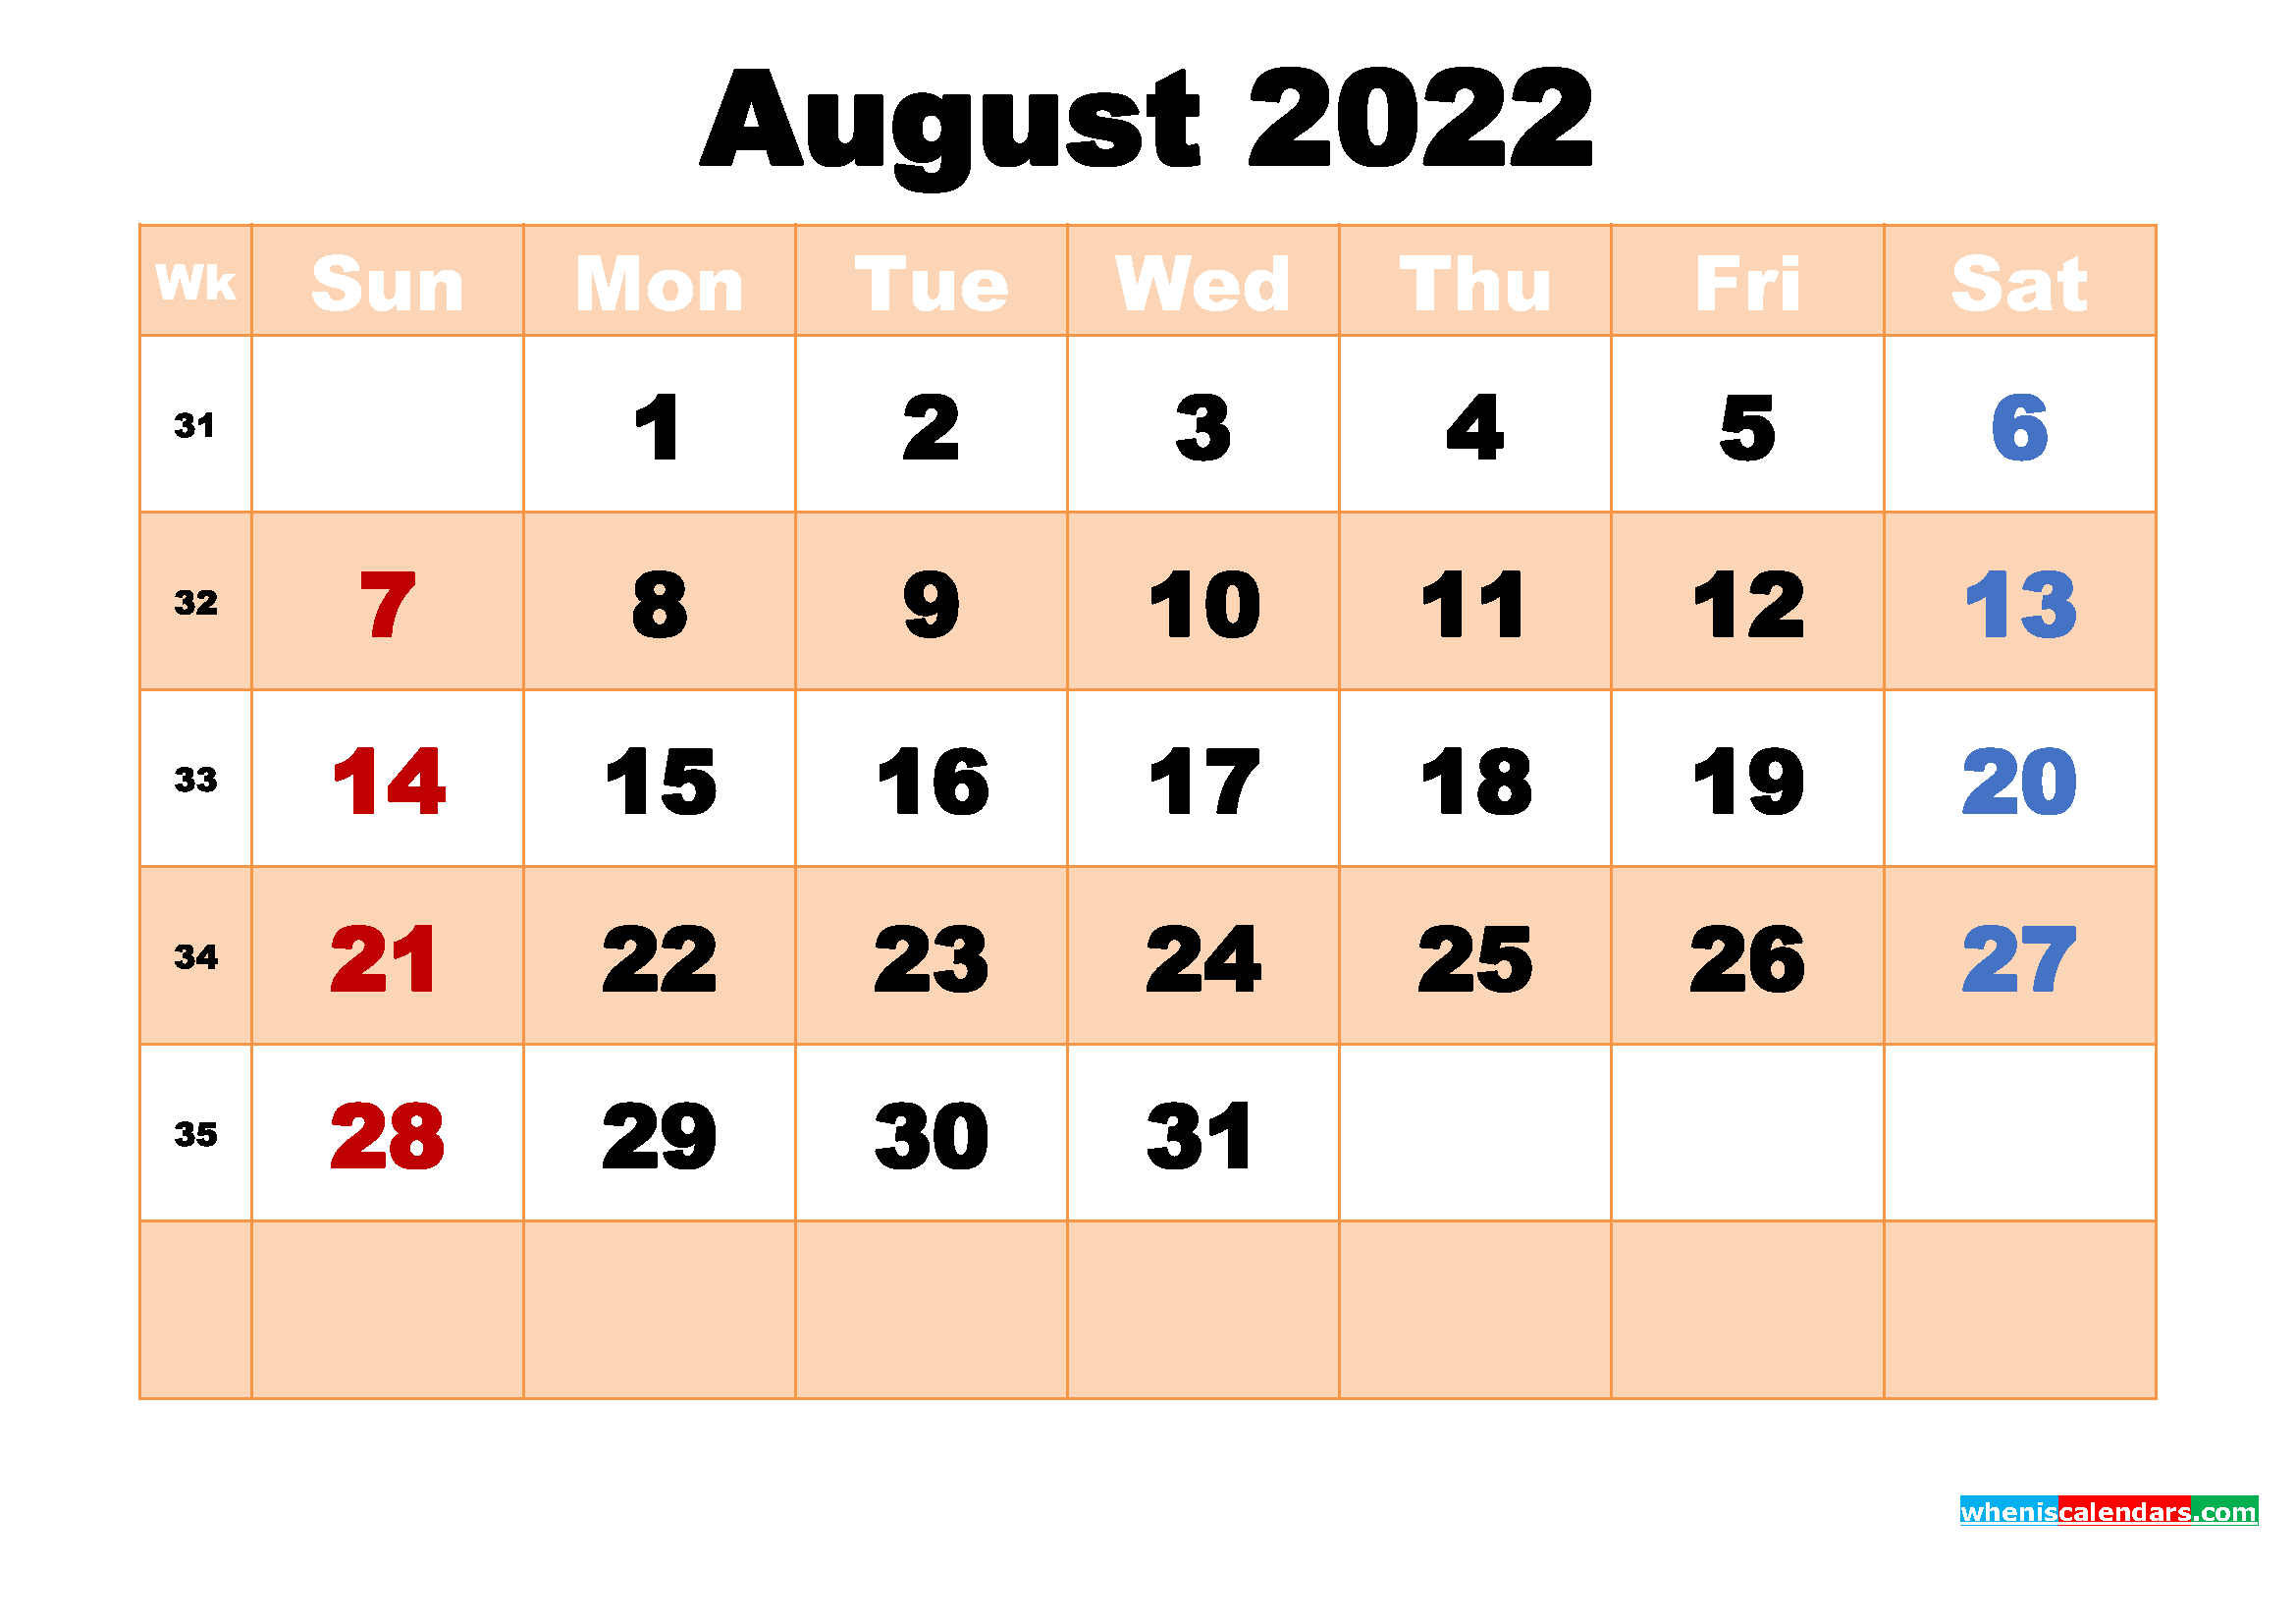 August 2022 Calendar With Holidays Wallpapers